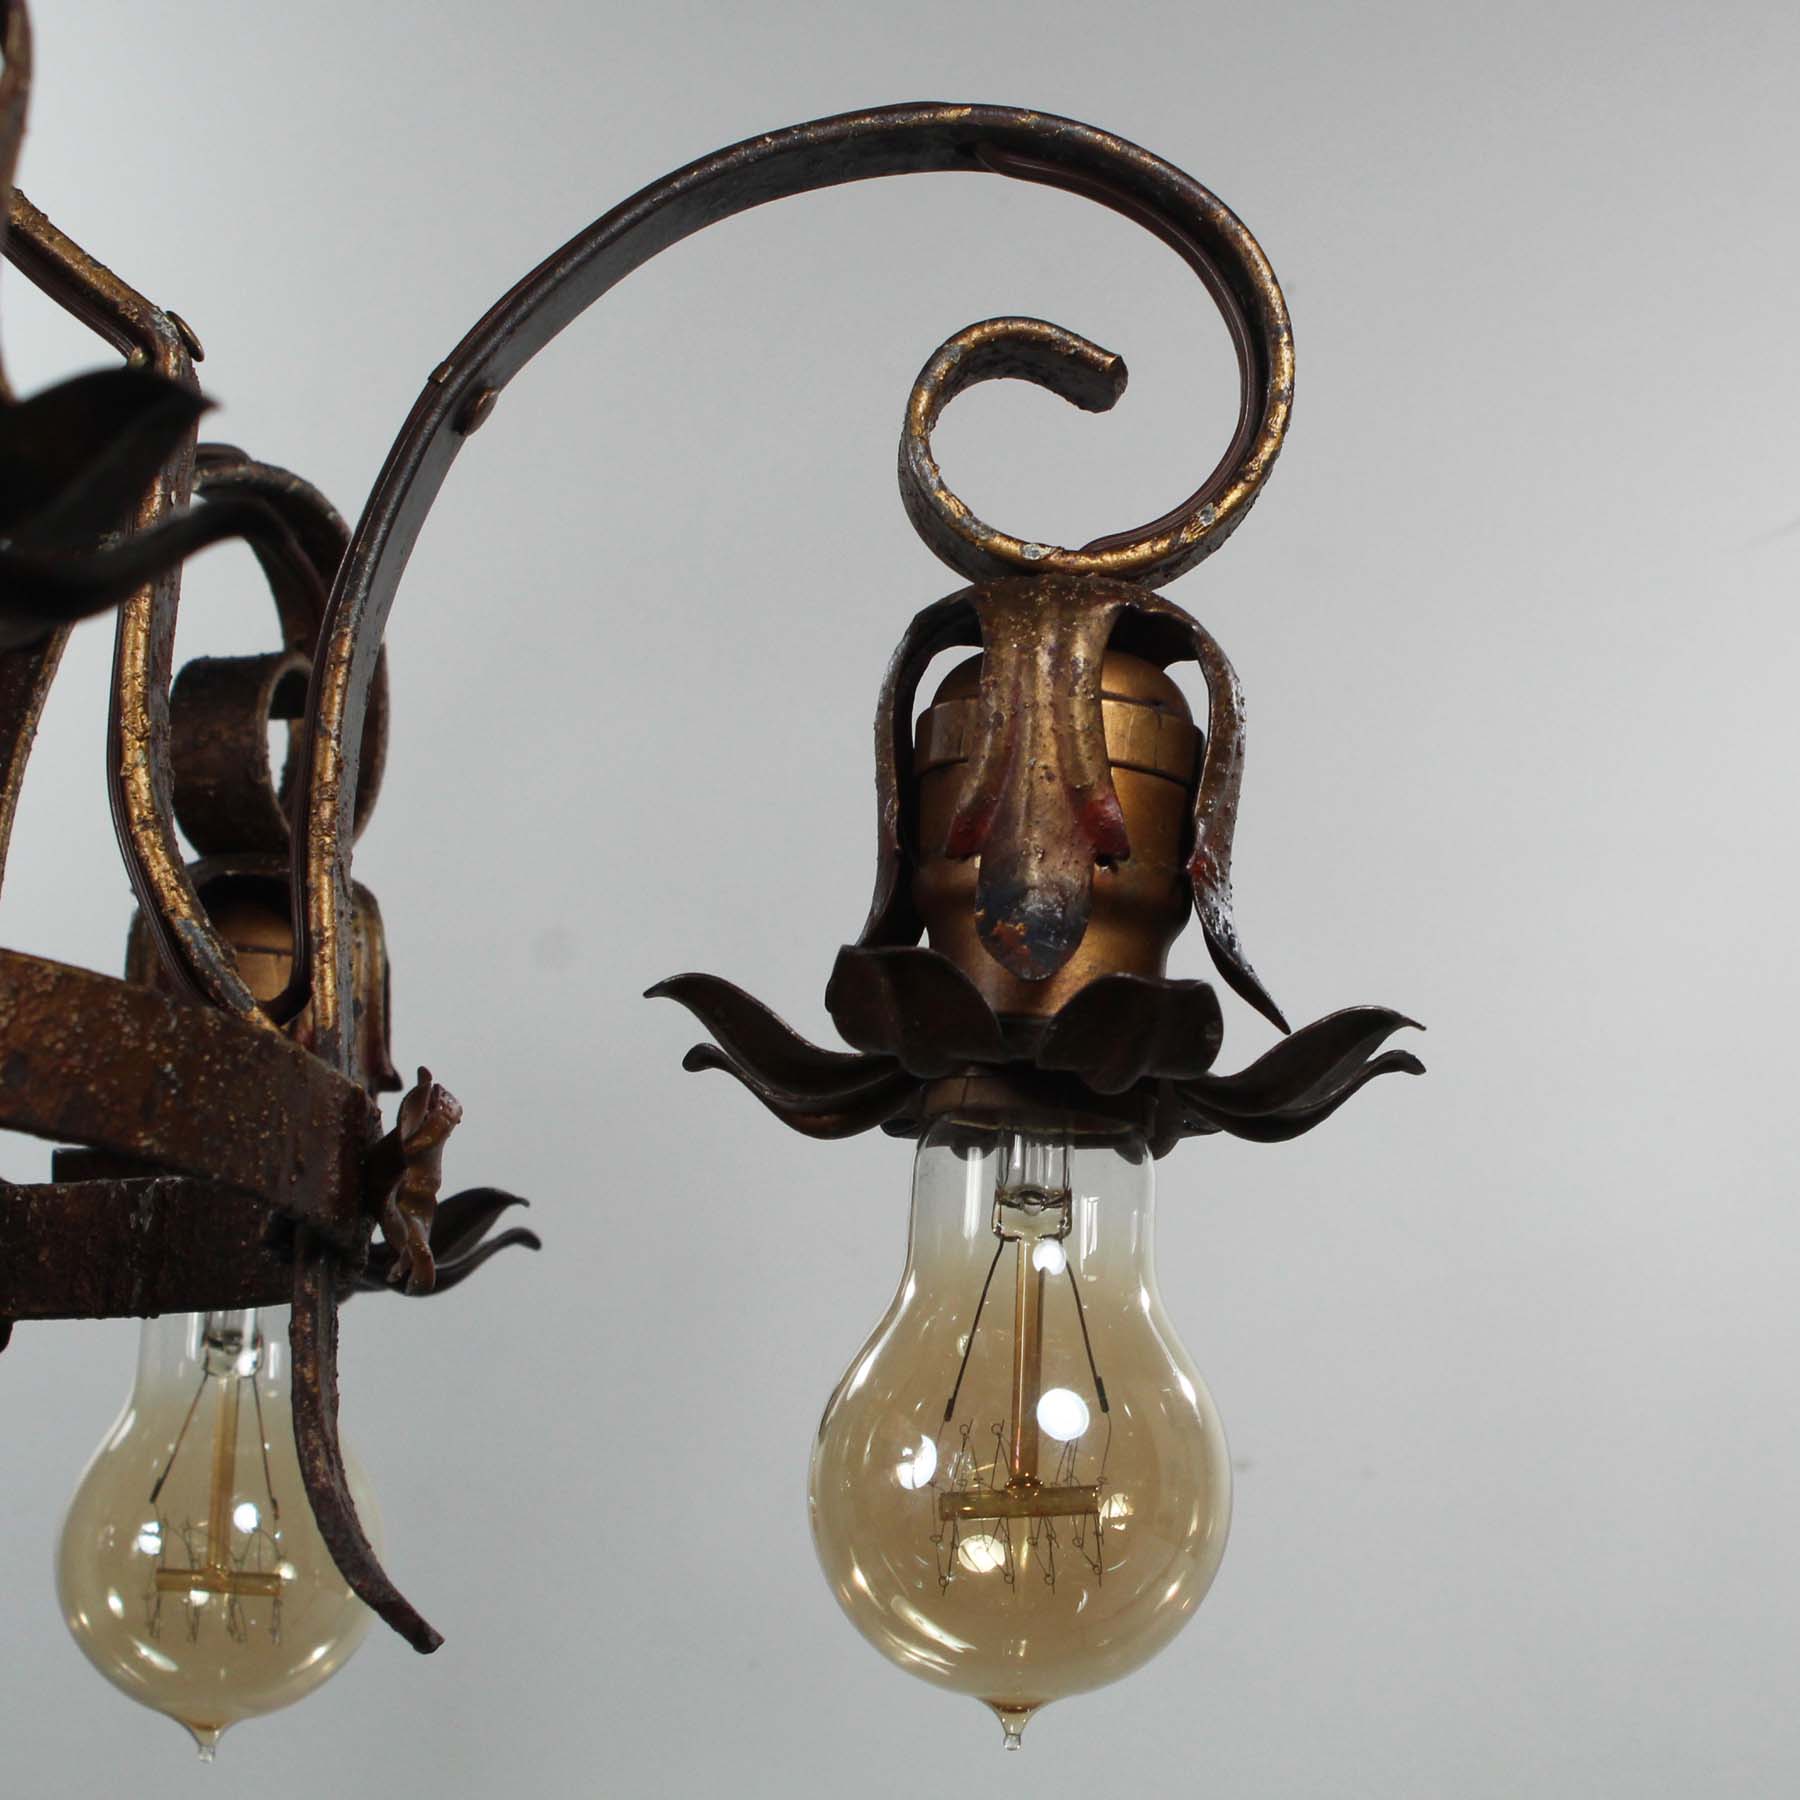 SOLD Antique Five-Light Iron Chandelier with Flowers, c. 1920s -70666